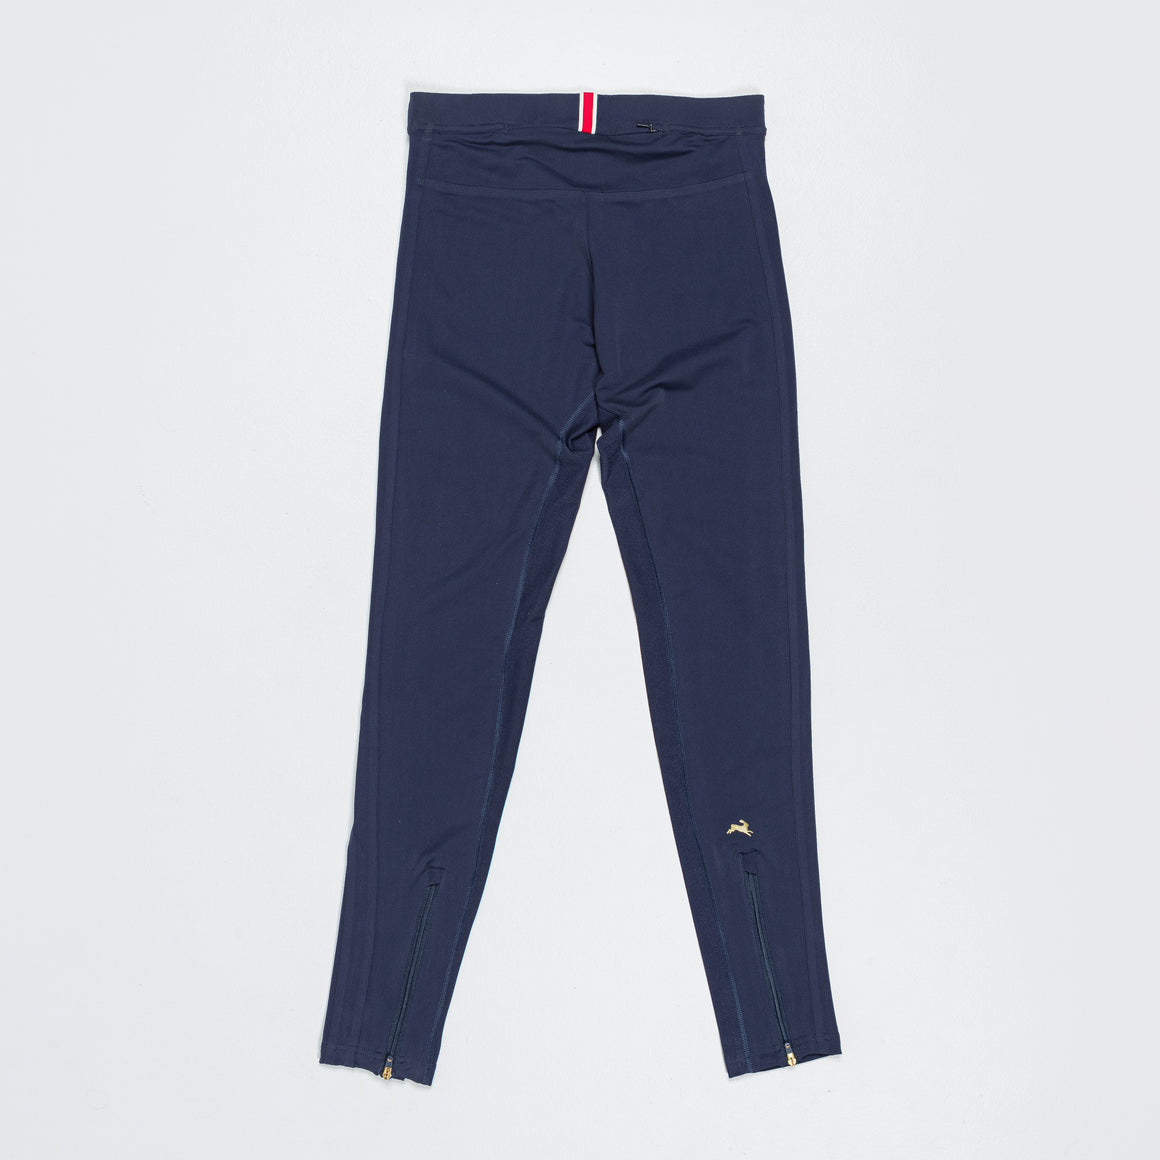 Tracksmith - Turnover Tights - Navy - Up There Athletics